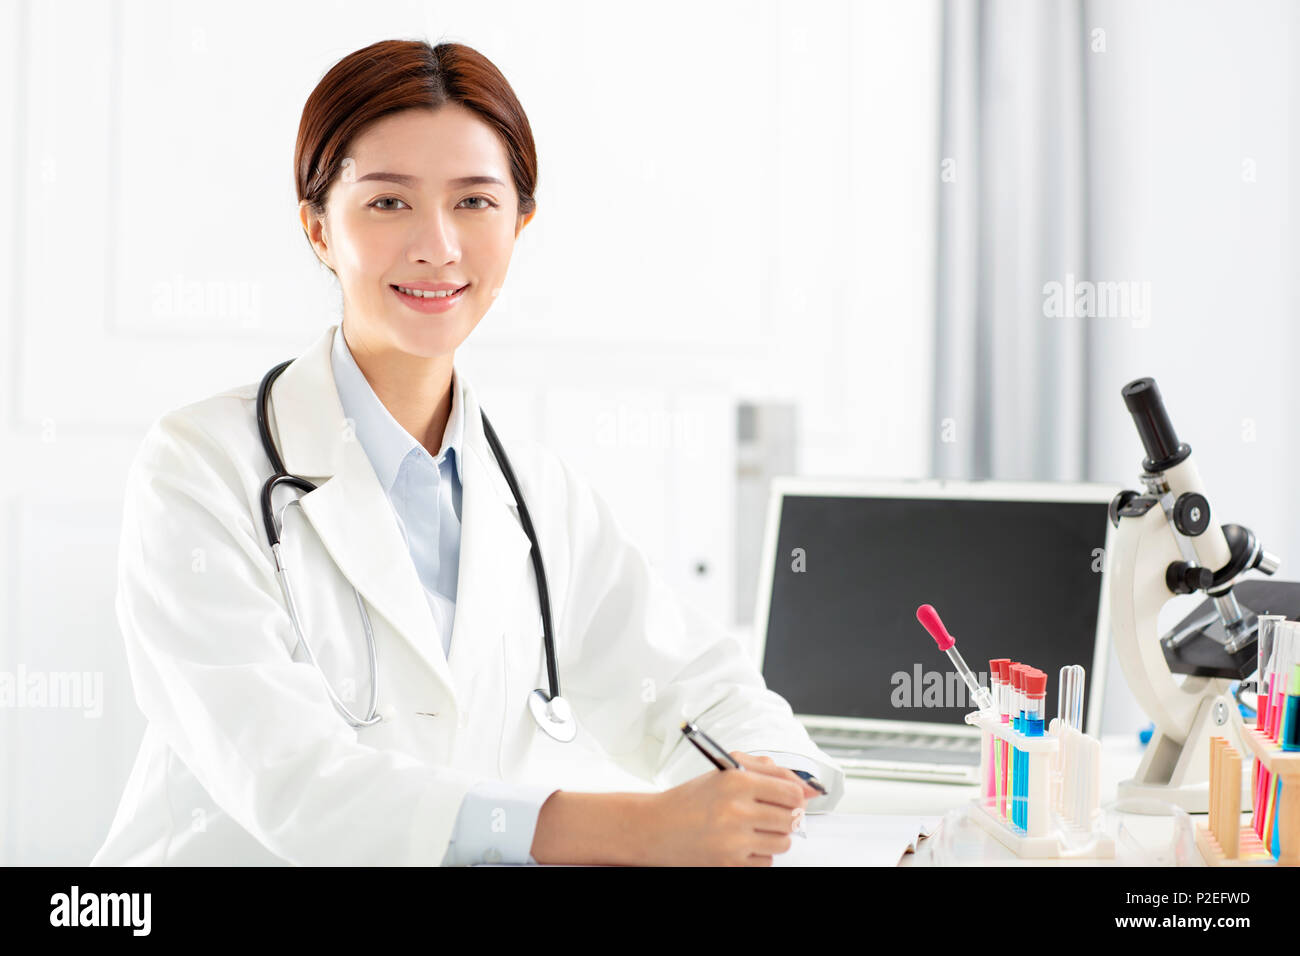 female medical or scientific researcher working in office Stock Photo